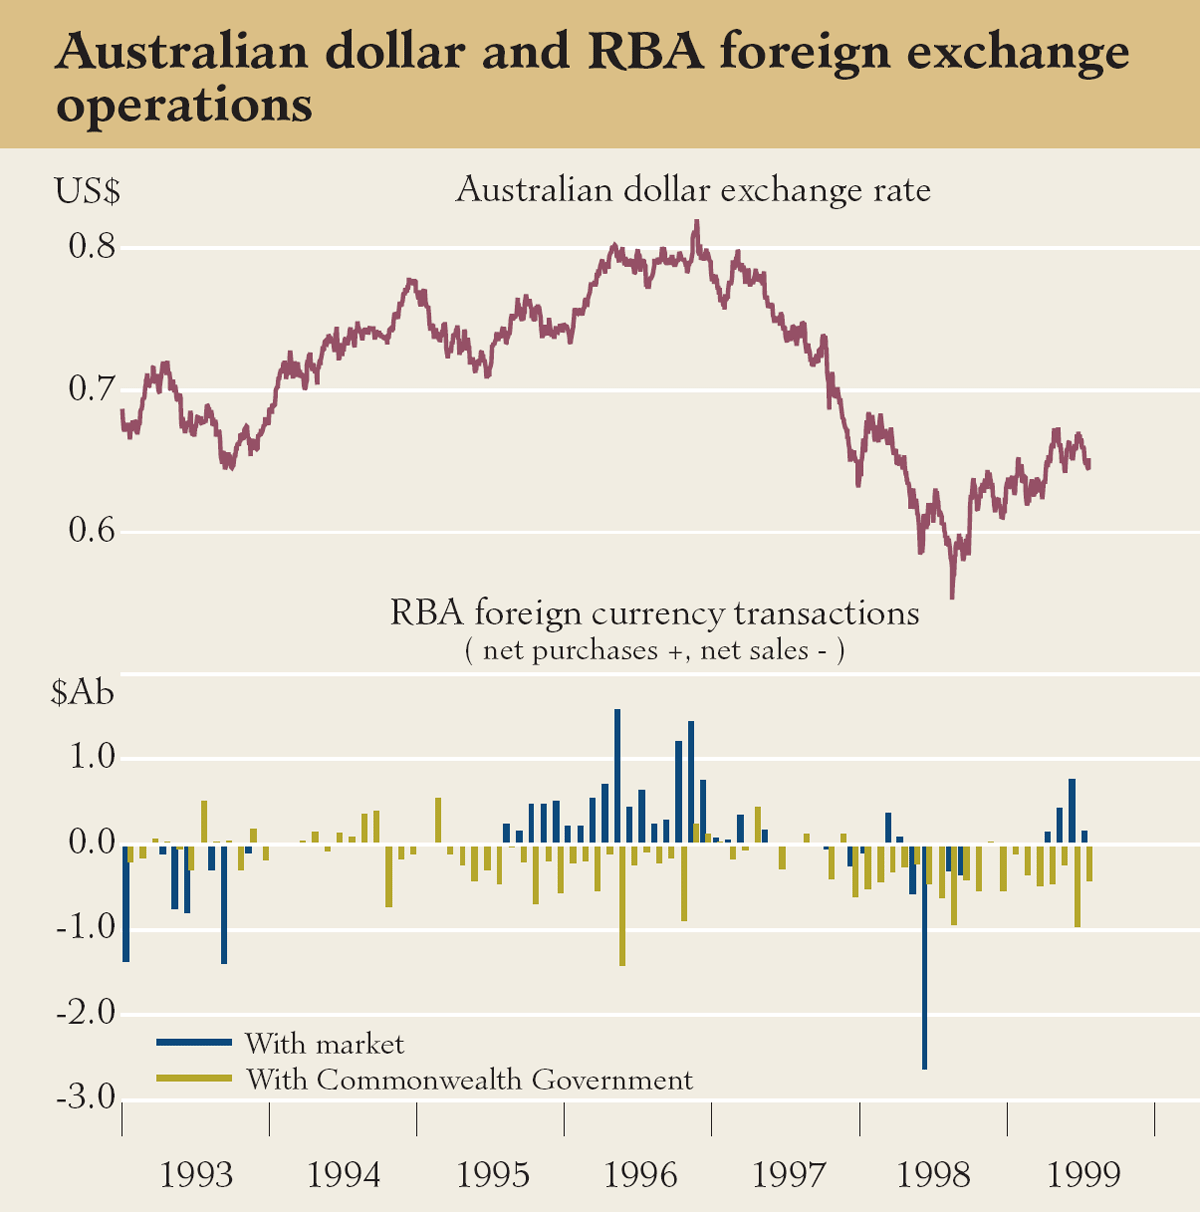 Graph showing Australian dollar and RBA foreign exchange operations